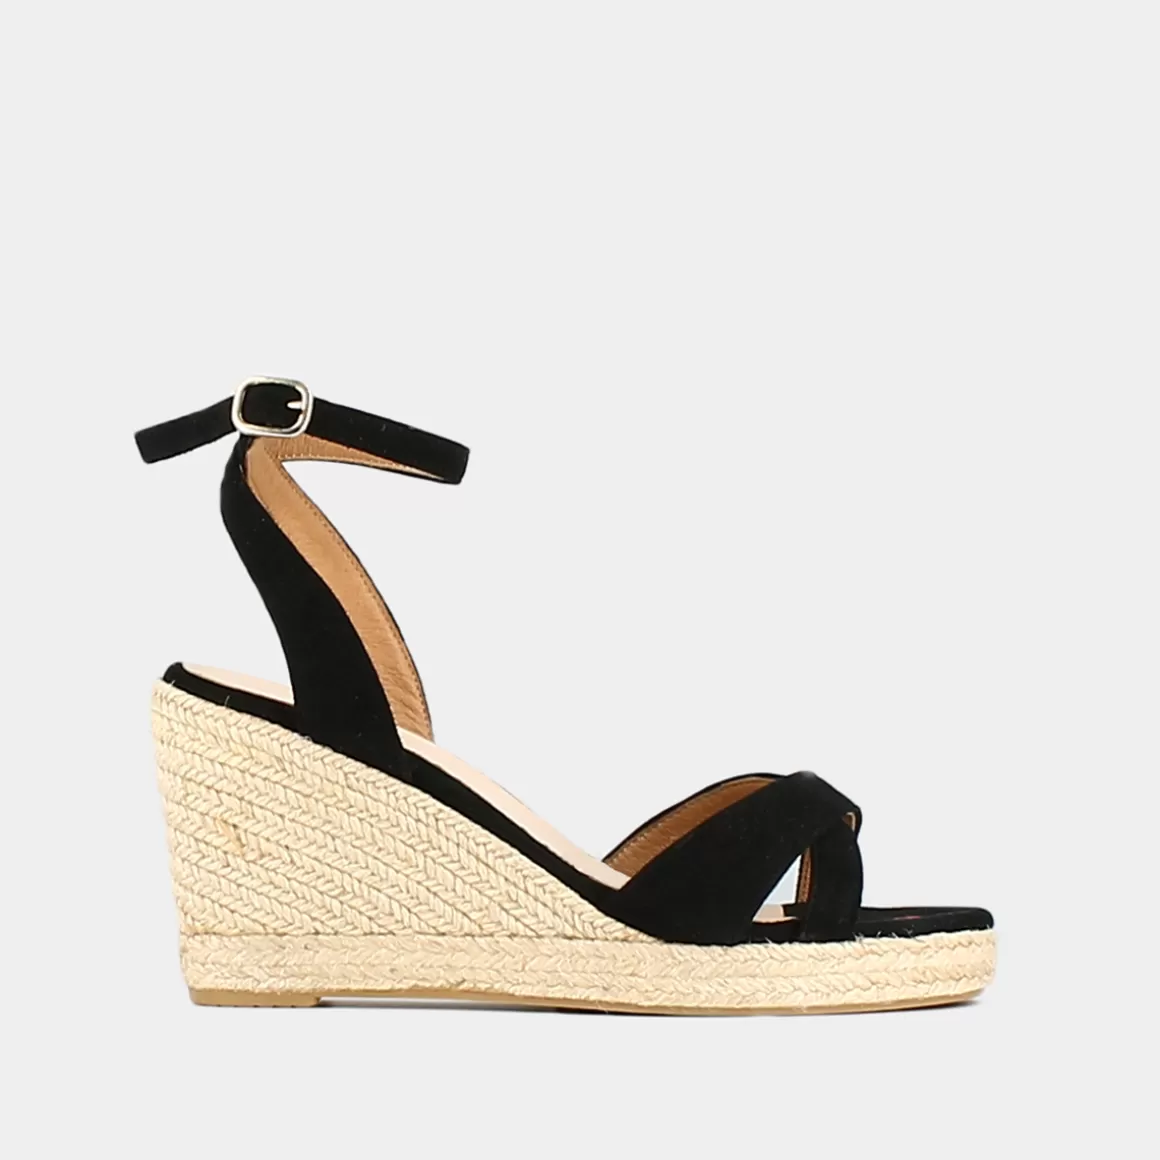 Espadrilles with high heels and straps<Jonak Hot